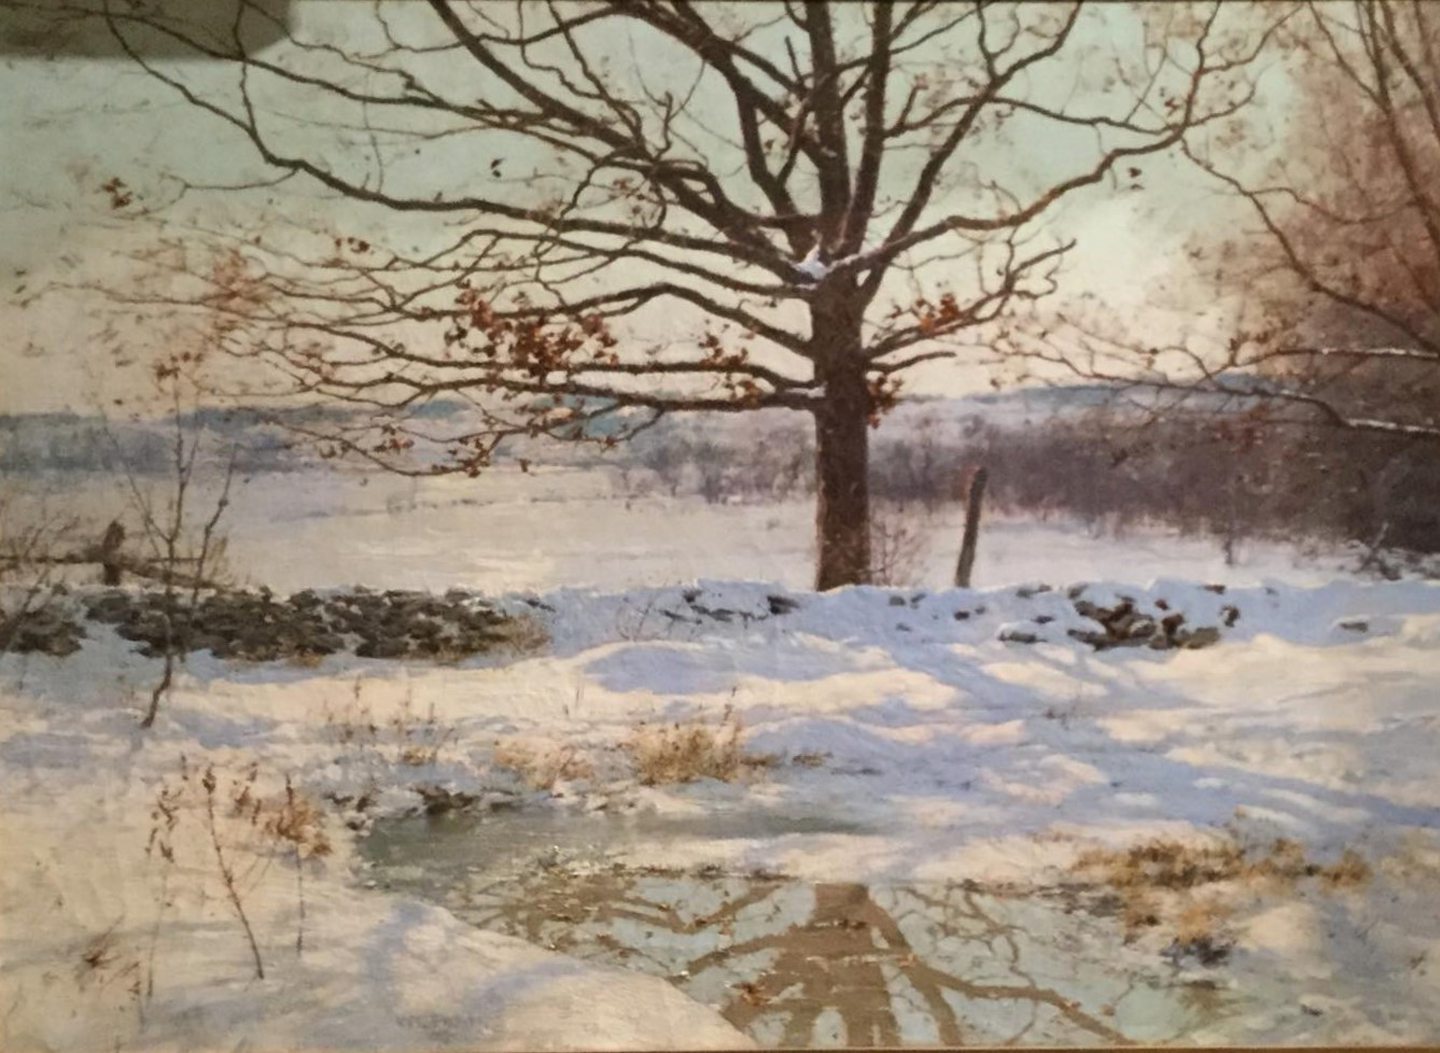 The painting by Walter Launt Palmer.